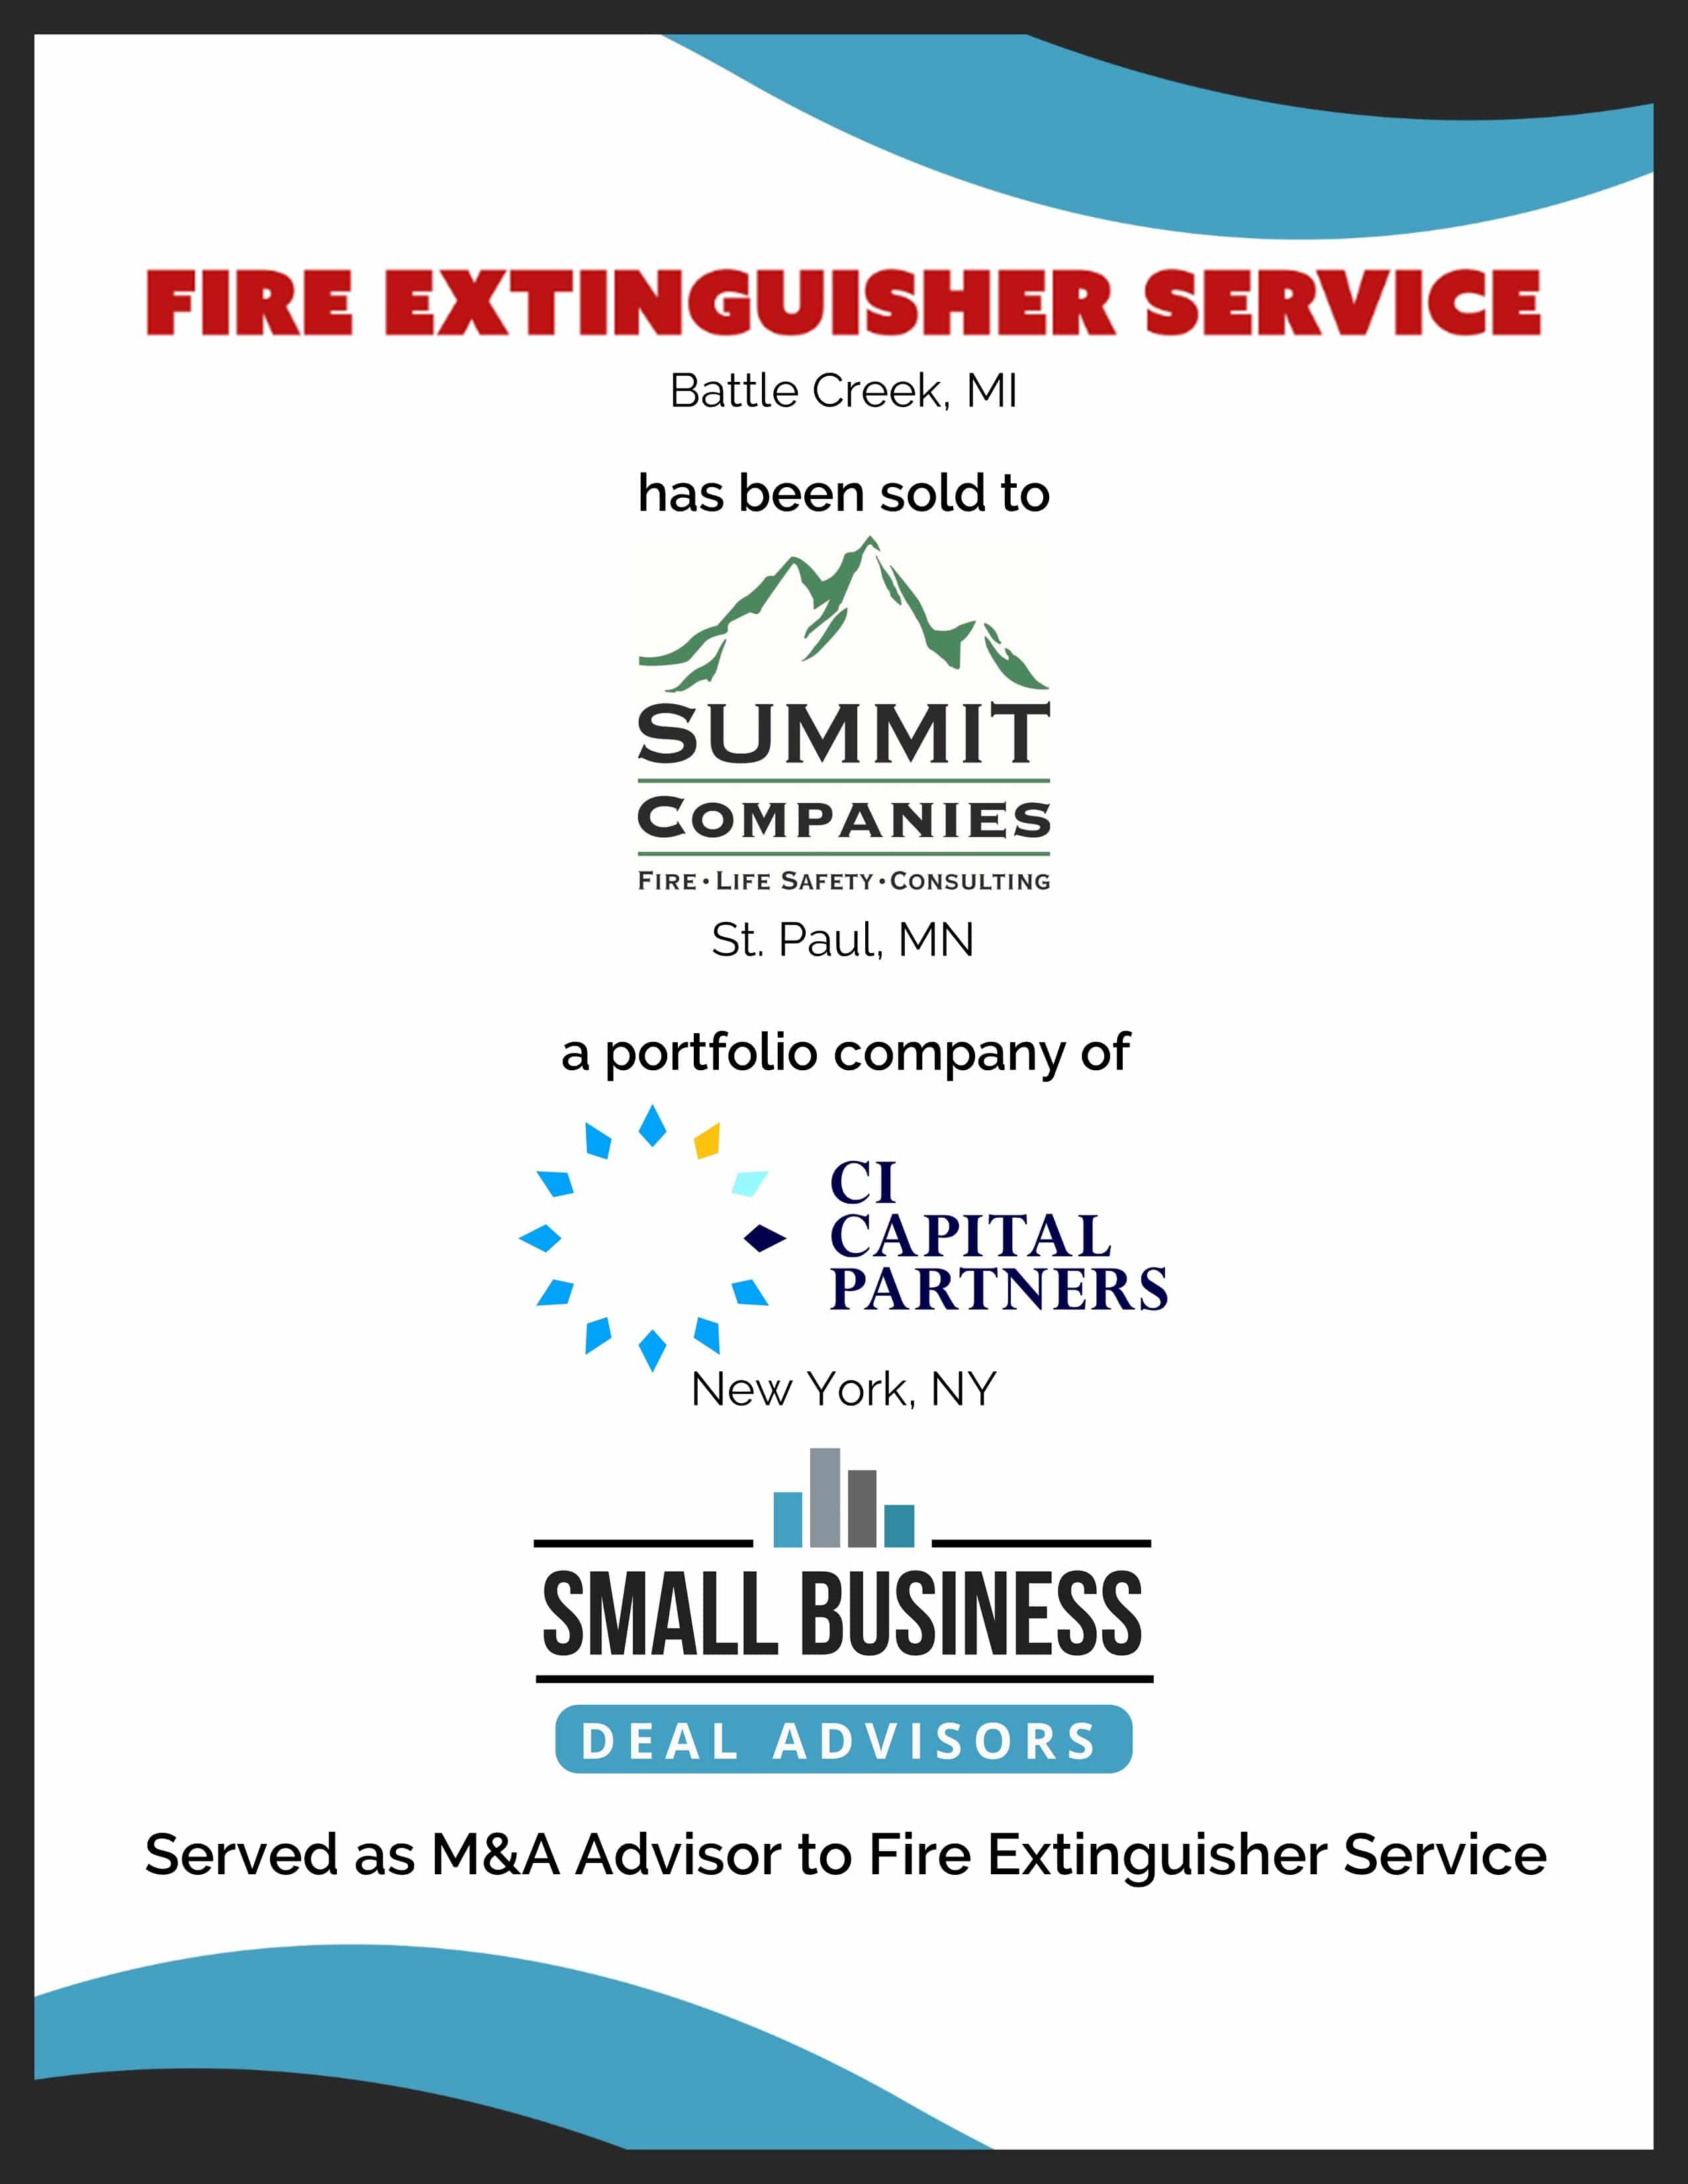 Fire Extinguisher Service Sold to Summit Companies CI Capital Partners